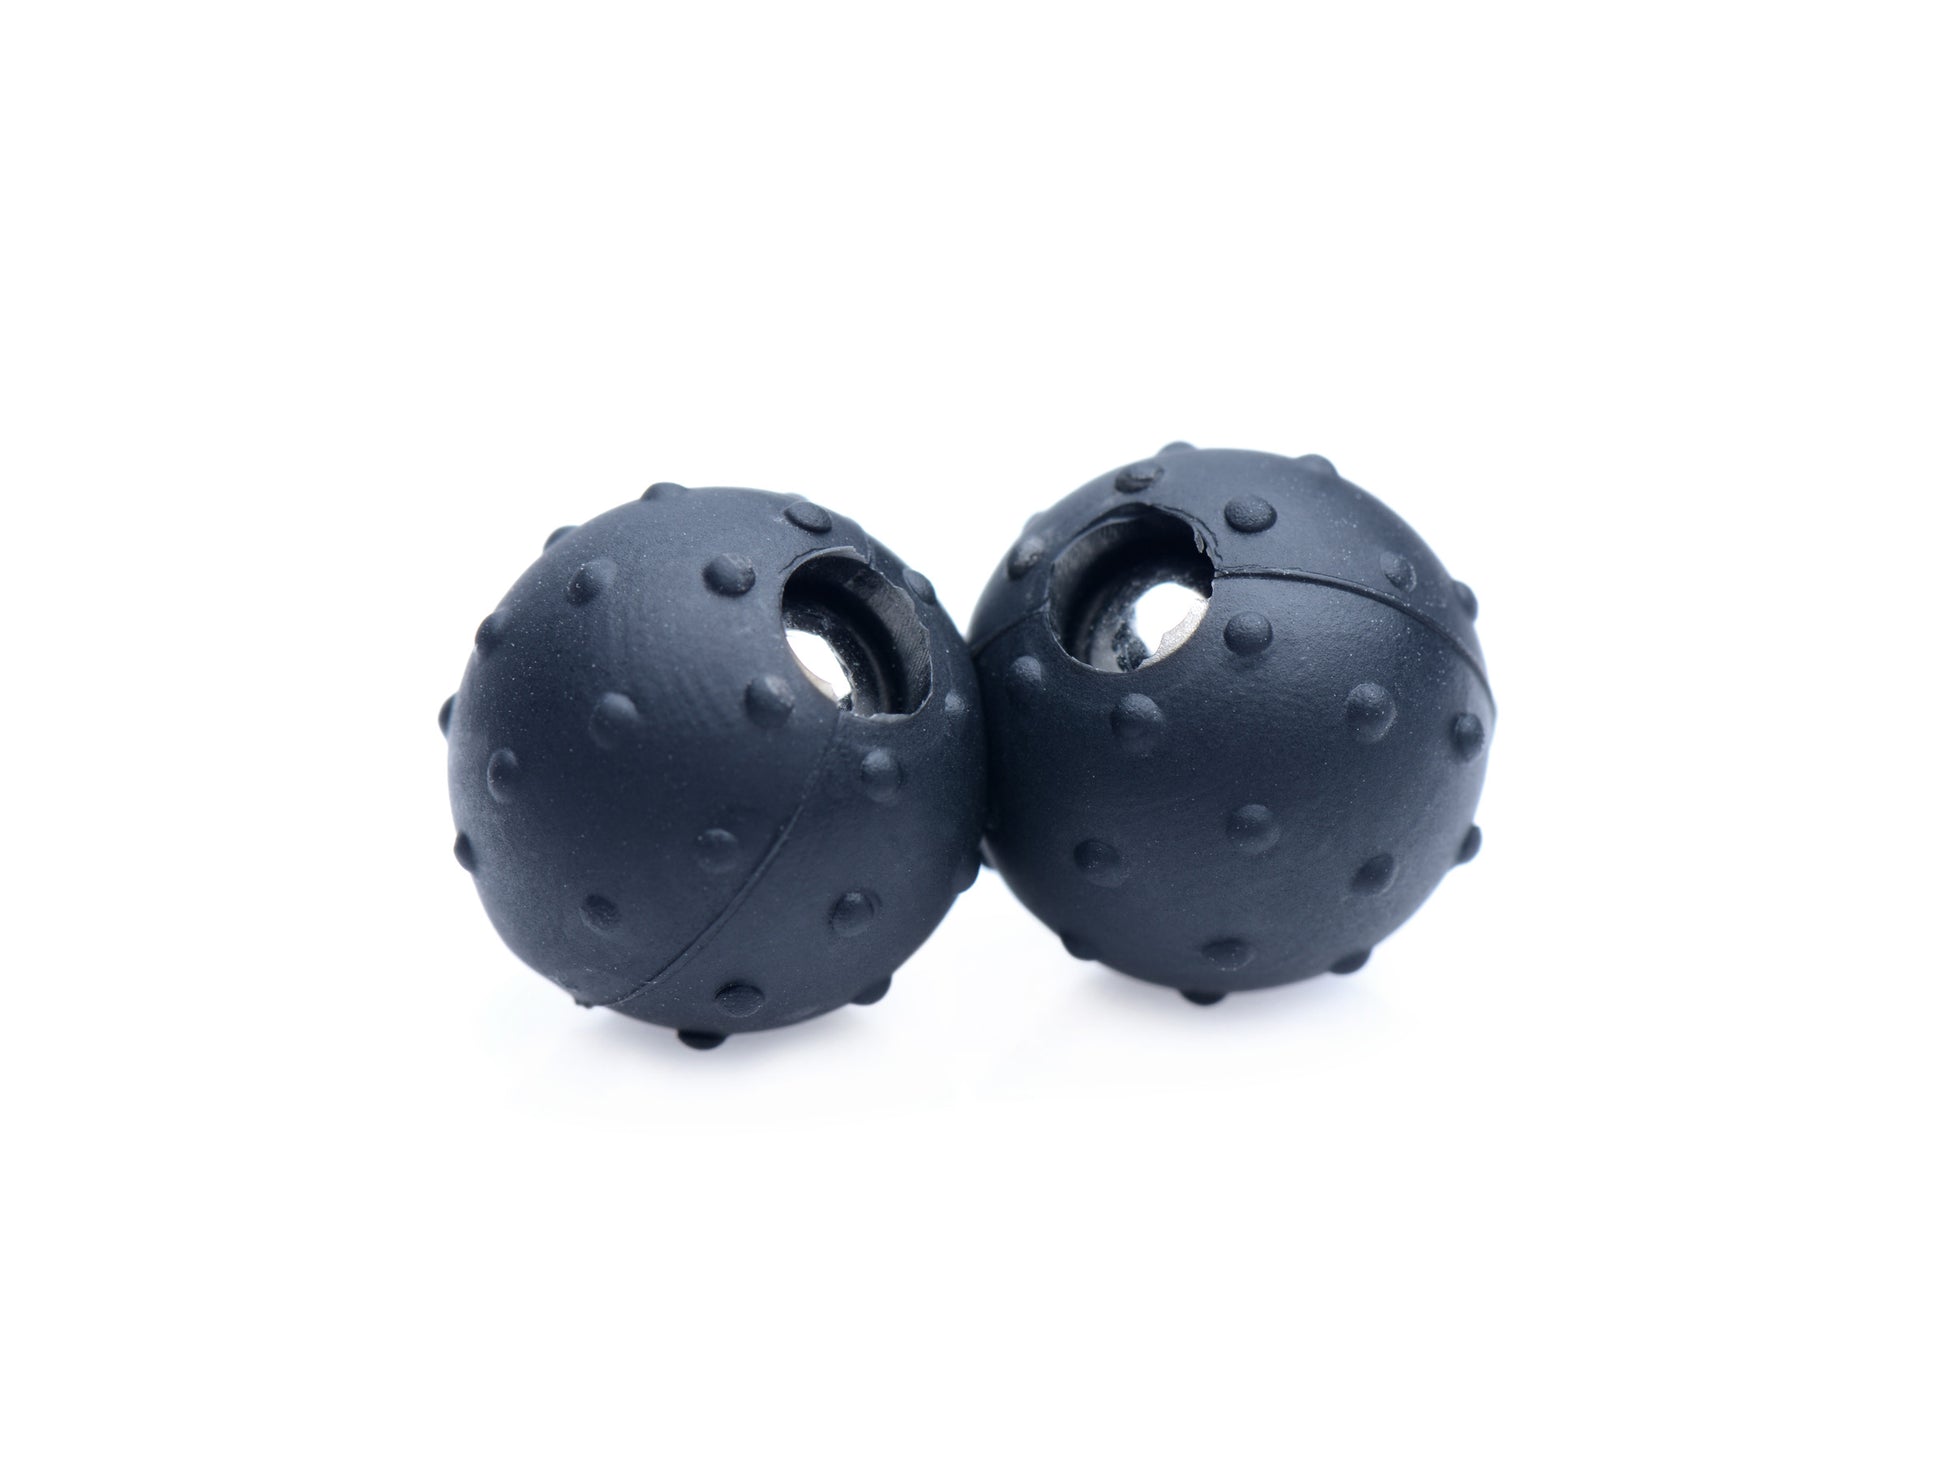 Dragons Orbs Nubbed Silicone Magnetic Balls - UABDSM